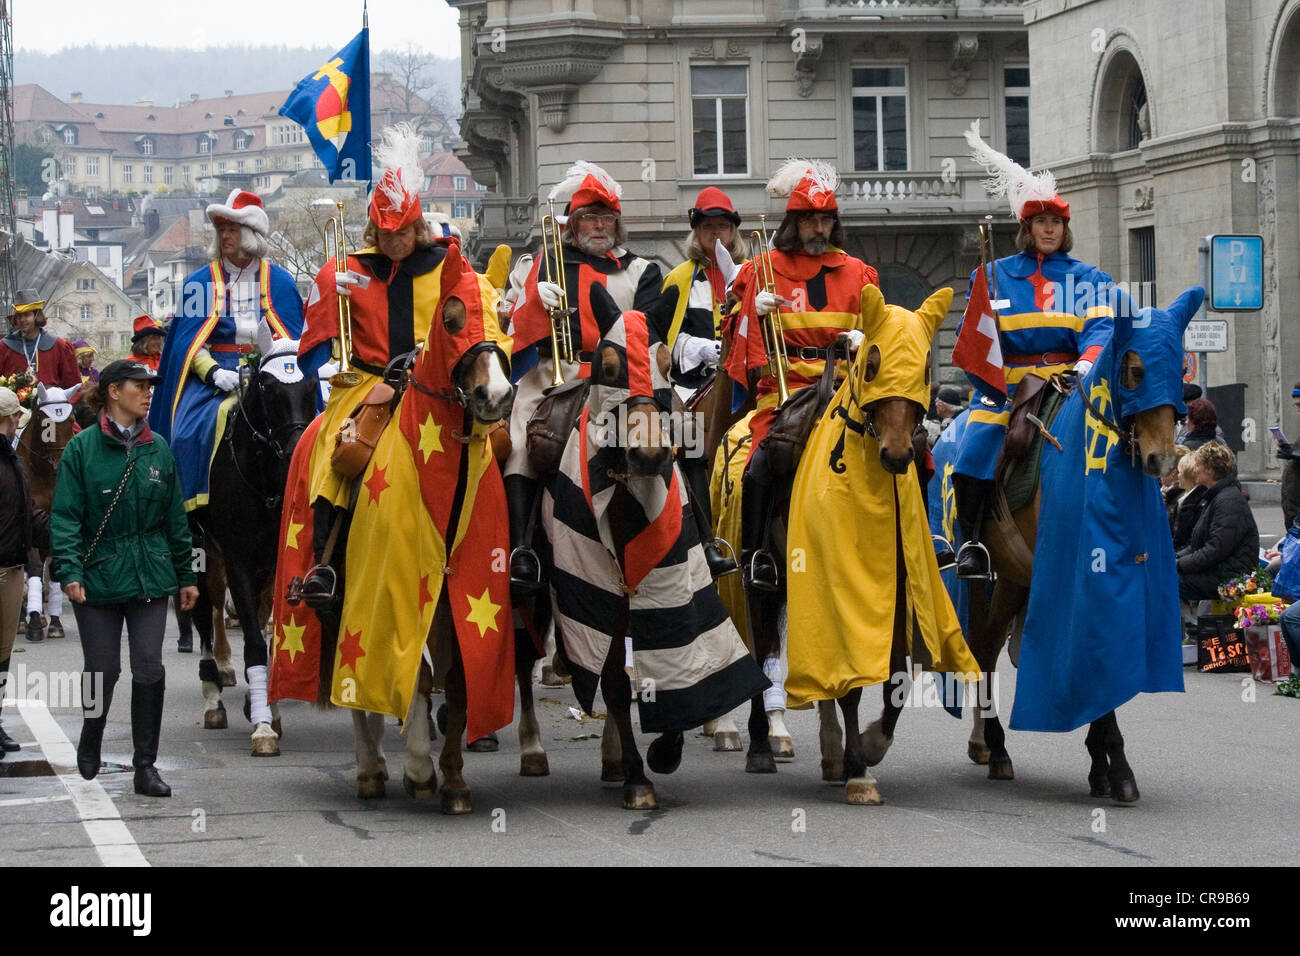 ZURICH - APRIL 16: Members of traditional annual spring parade of Guilds, symbolising end of the winter, on April 16, 2012 in Zu Stock Photo